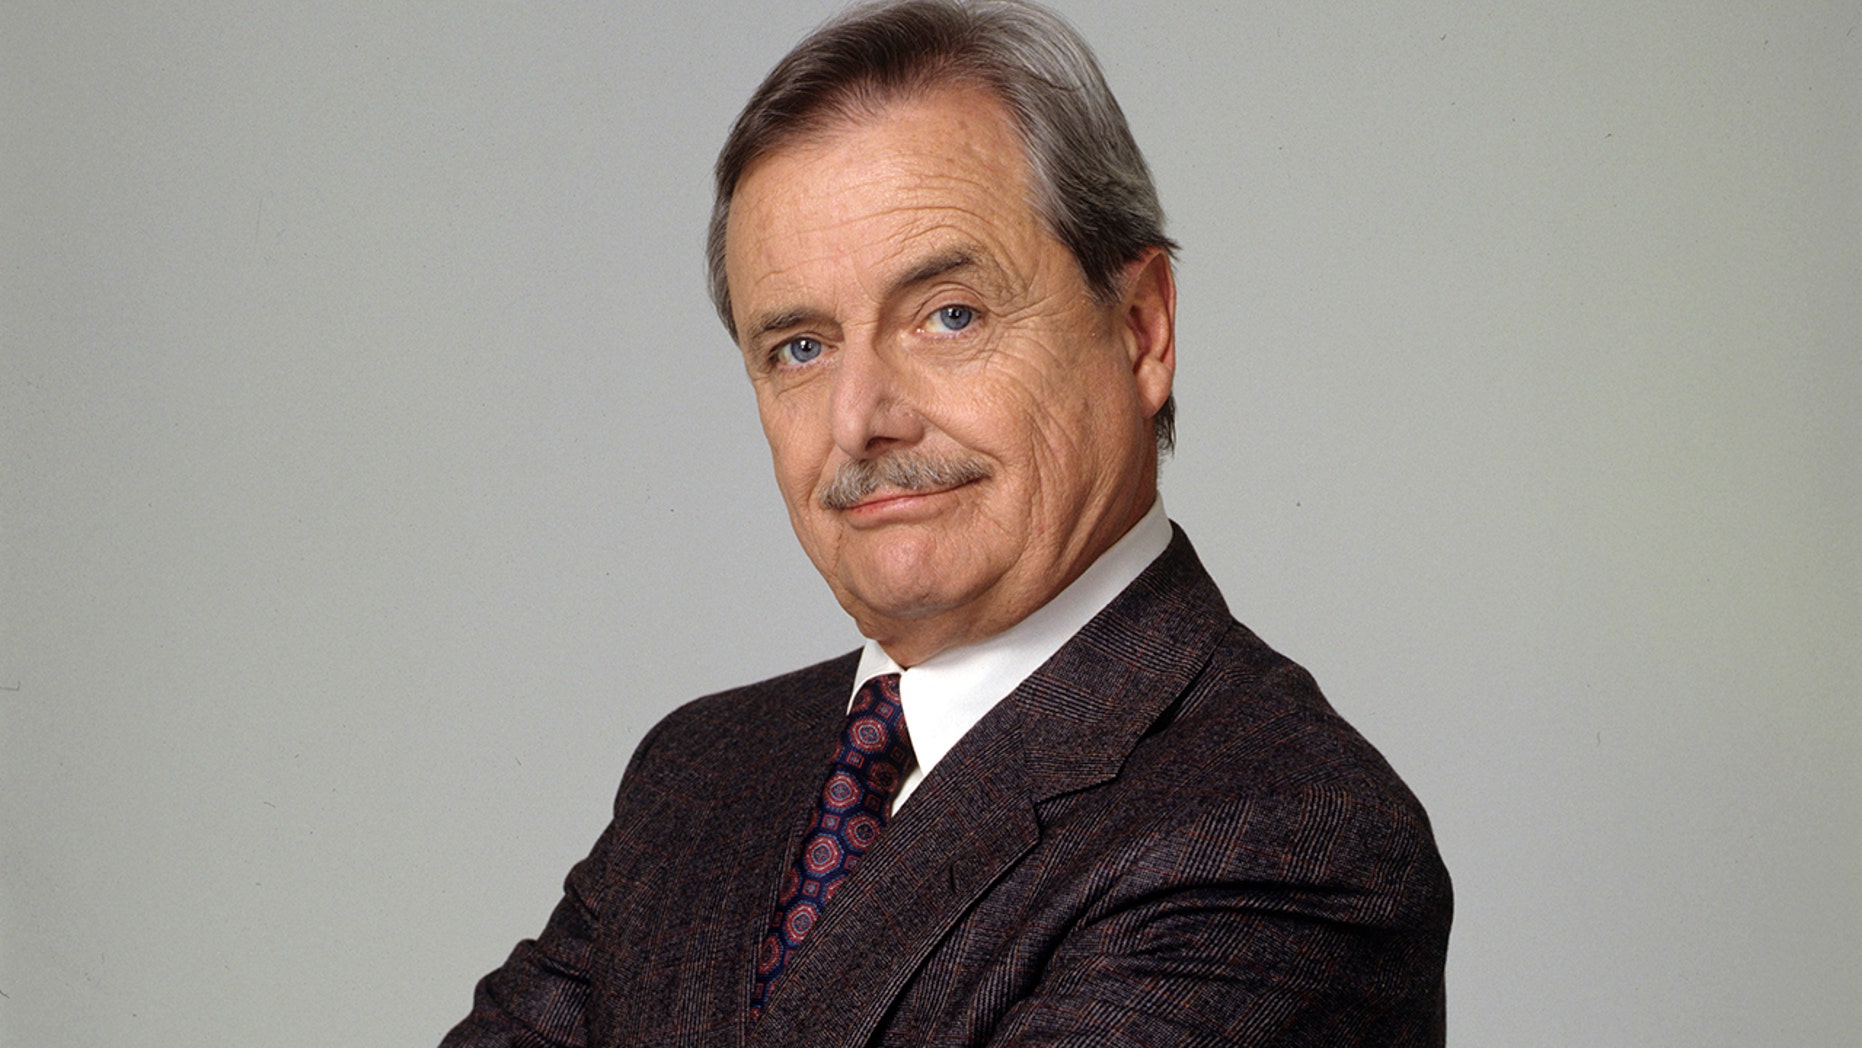 Actor William Daniels foiled on an attempted burglary on his home on Saturday.